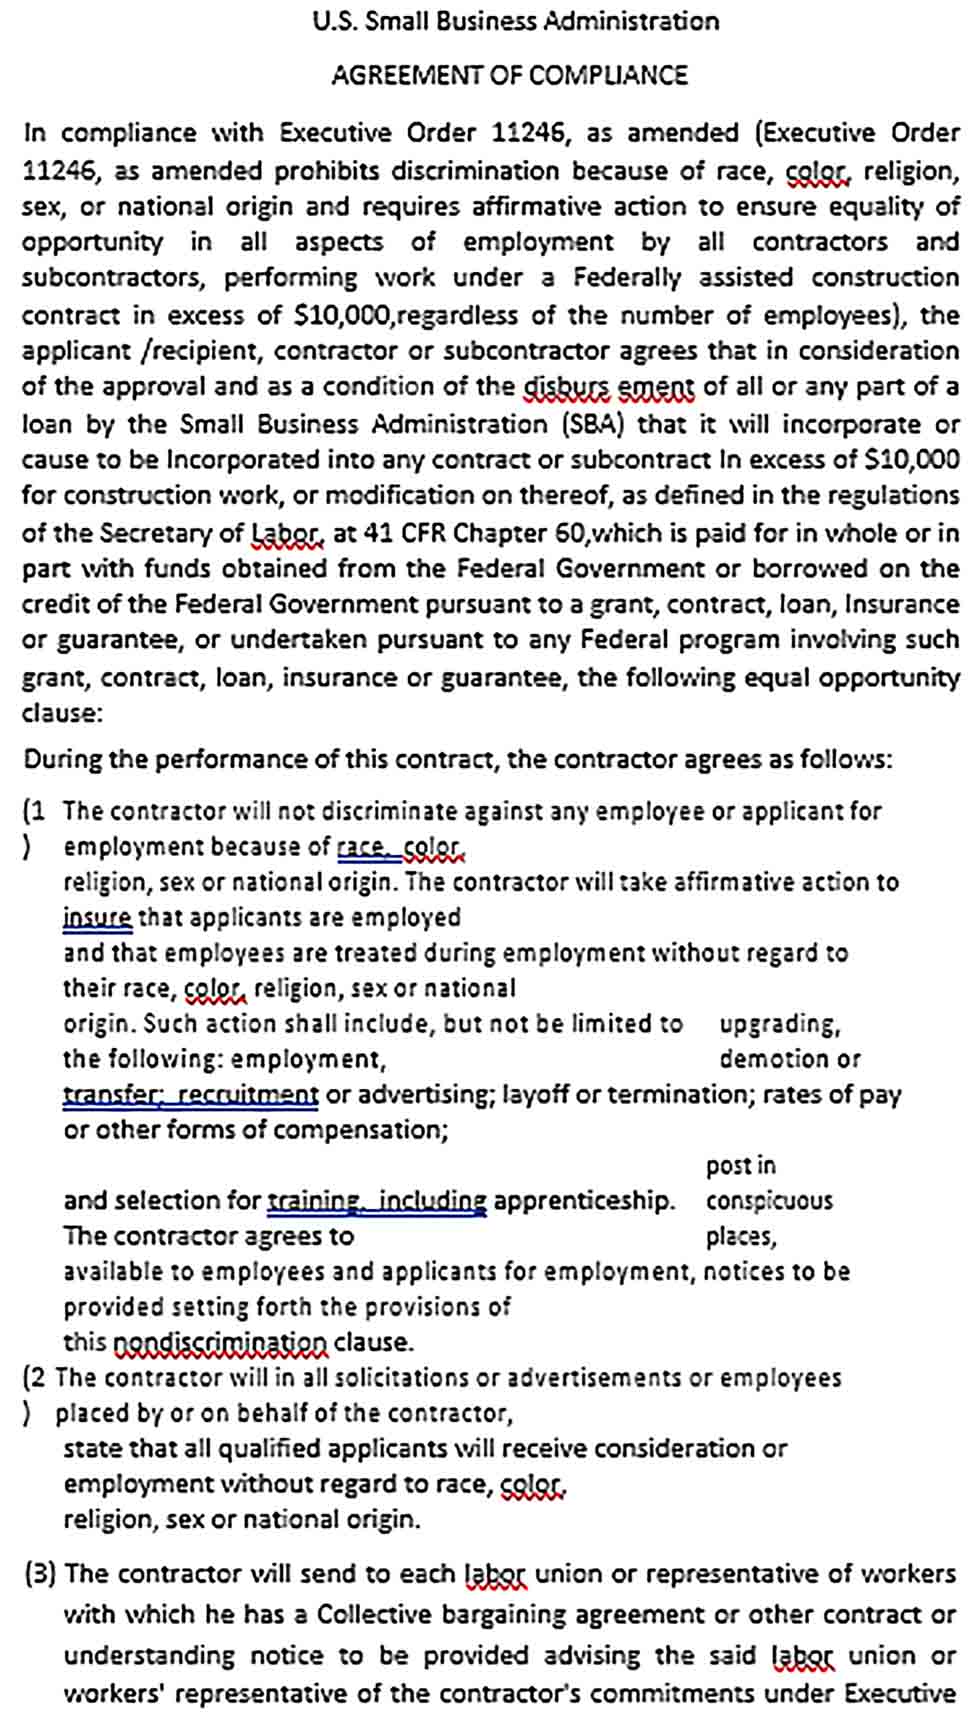 Sample Small Business Administration Agreement 1